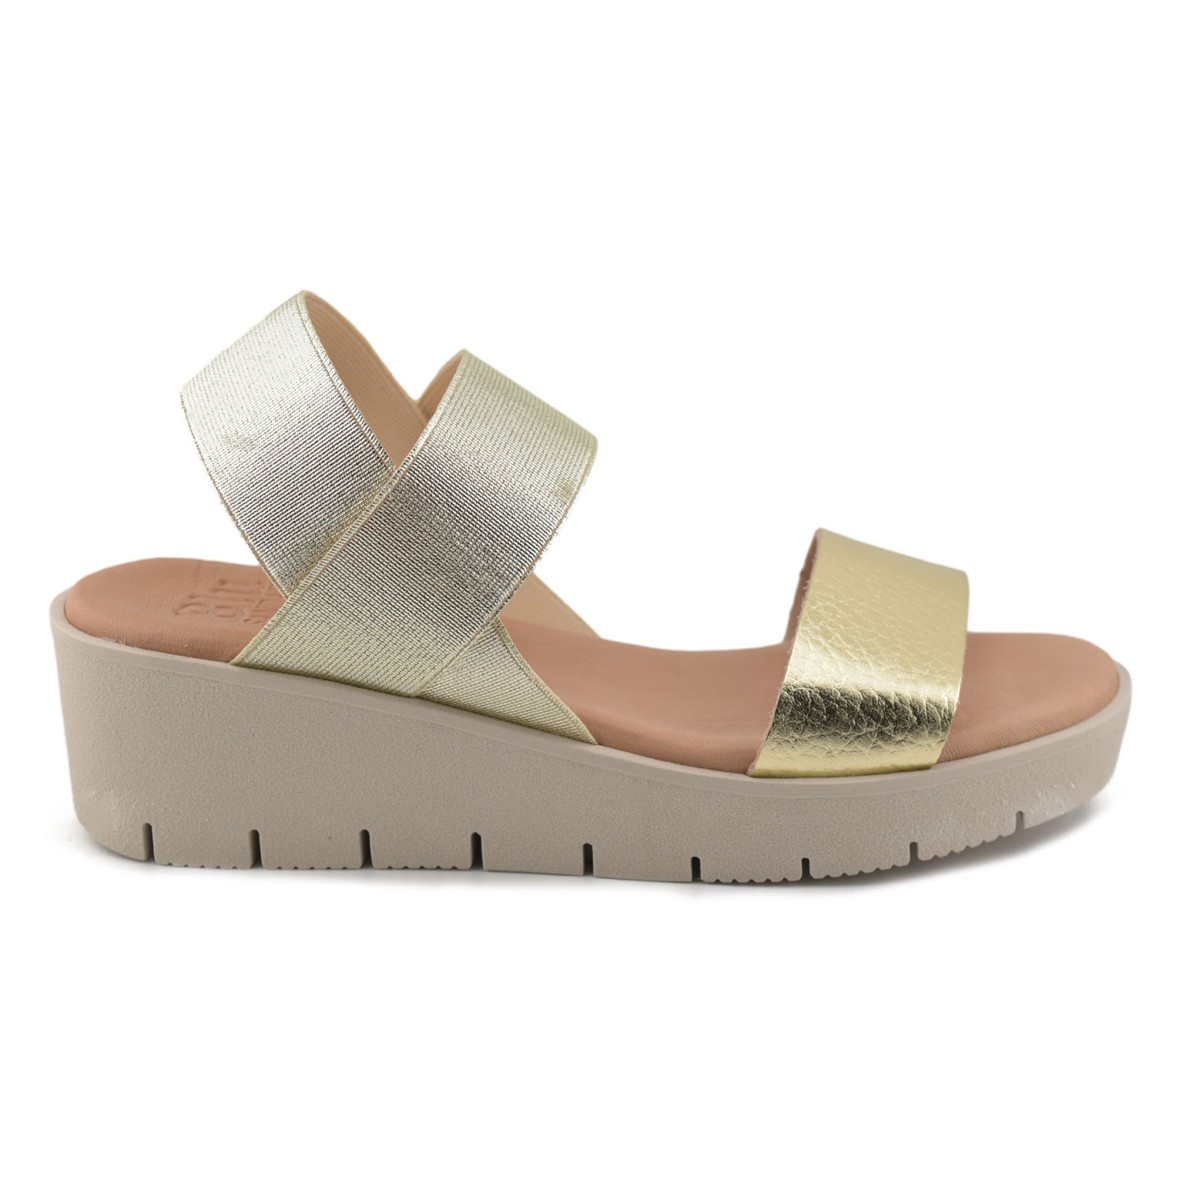 Golden leather sandals with wedge by Blusandal